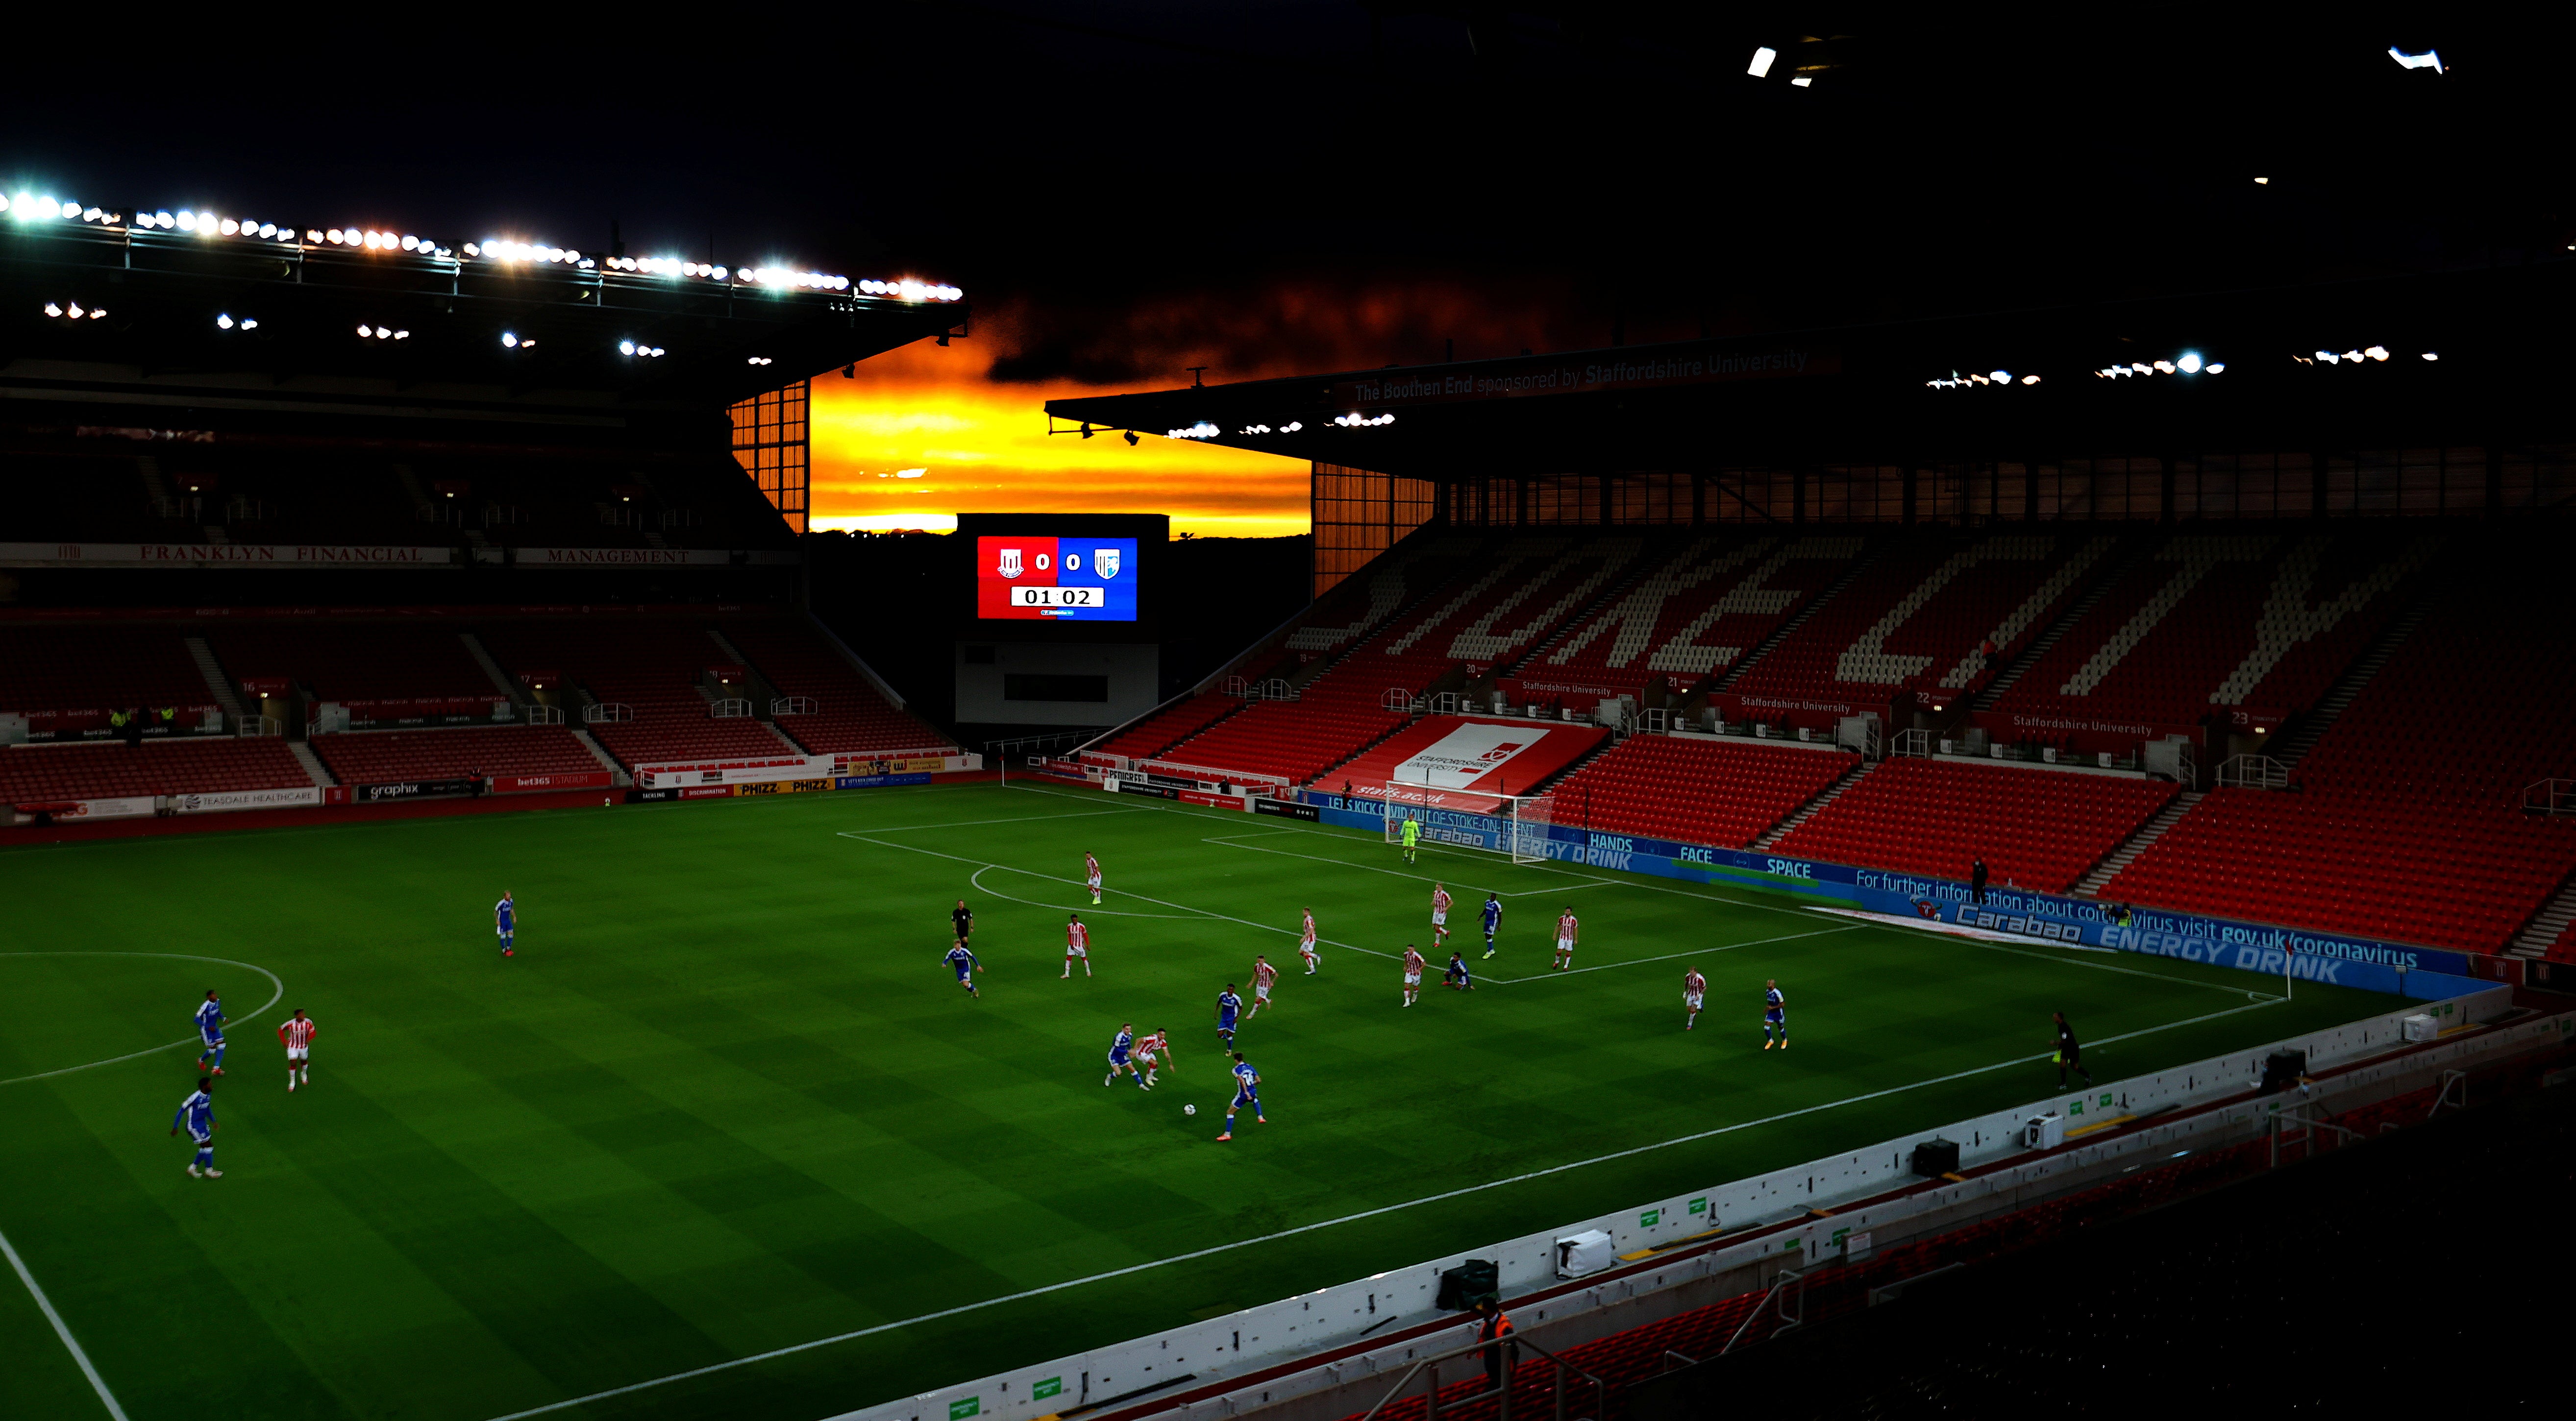 The third round Carabao Cup match between Stoke City and Gillingham at the Bet365 Stadium in September